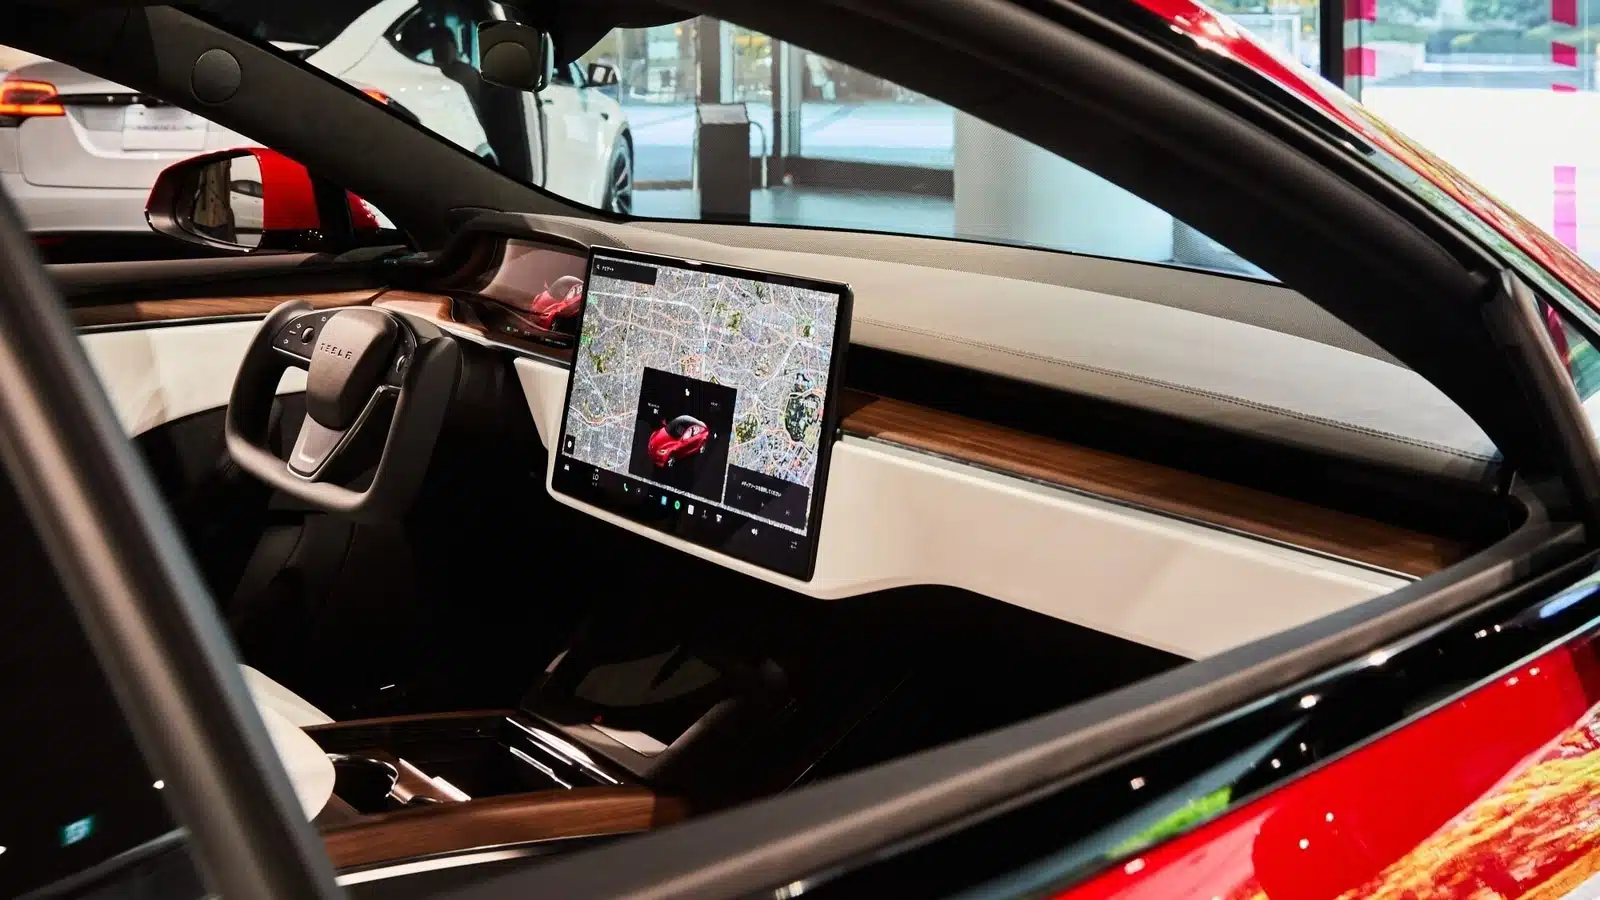 Tesla updates iPhone app to boost precision tracking and security akin to Apple AirTag tech